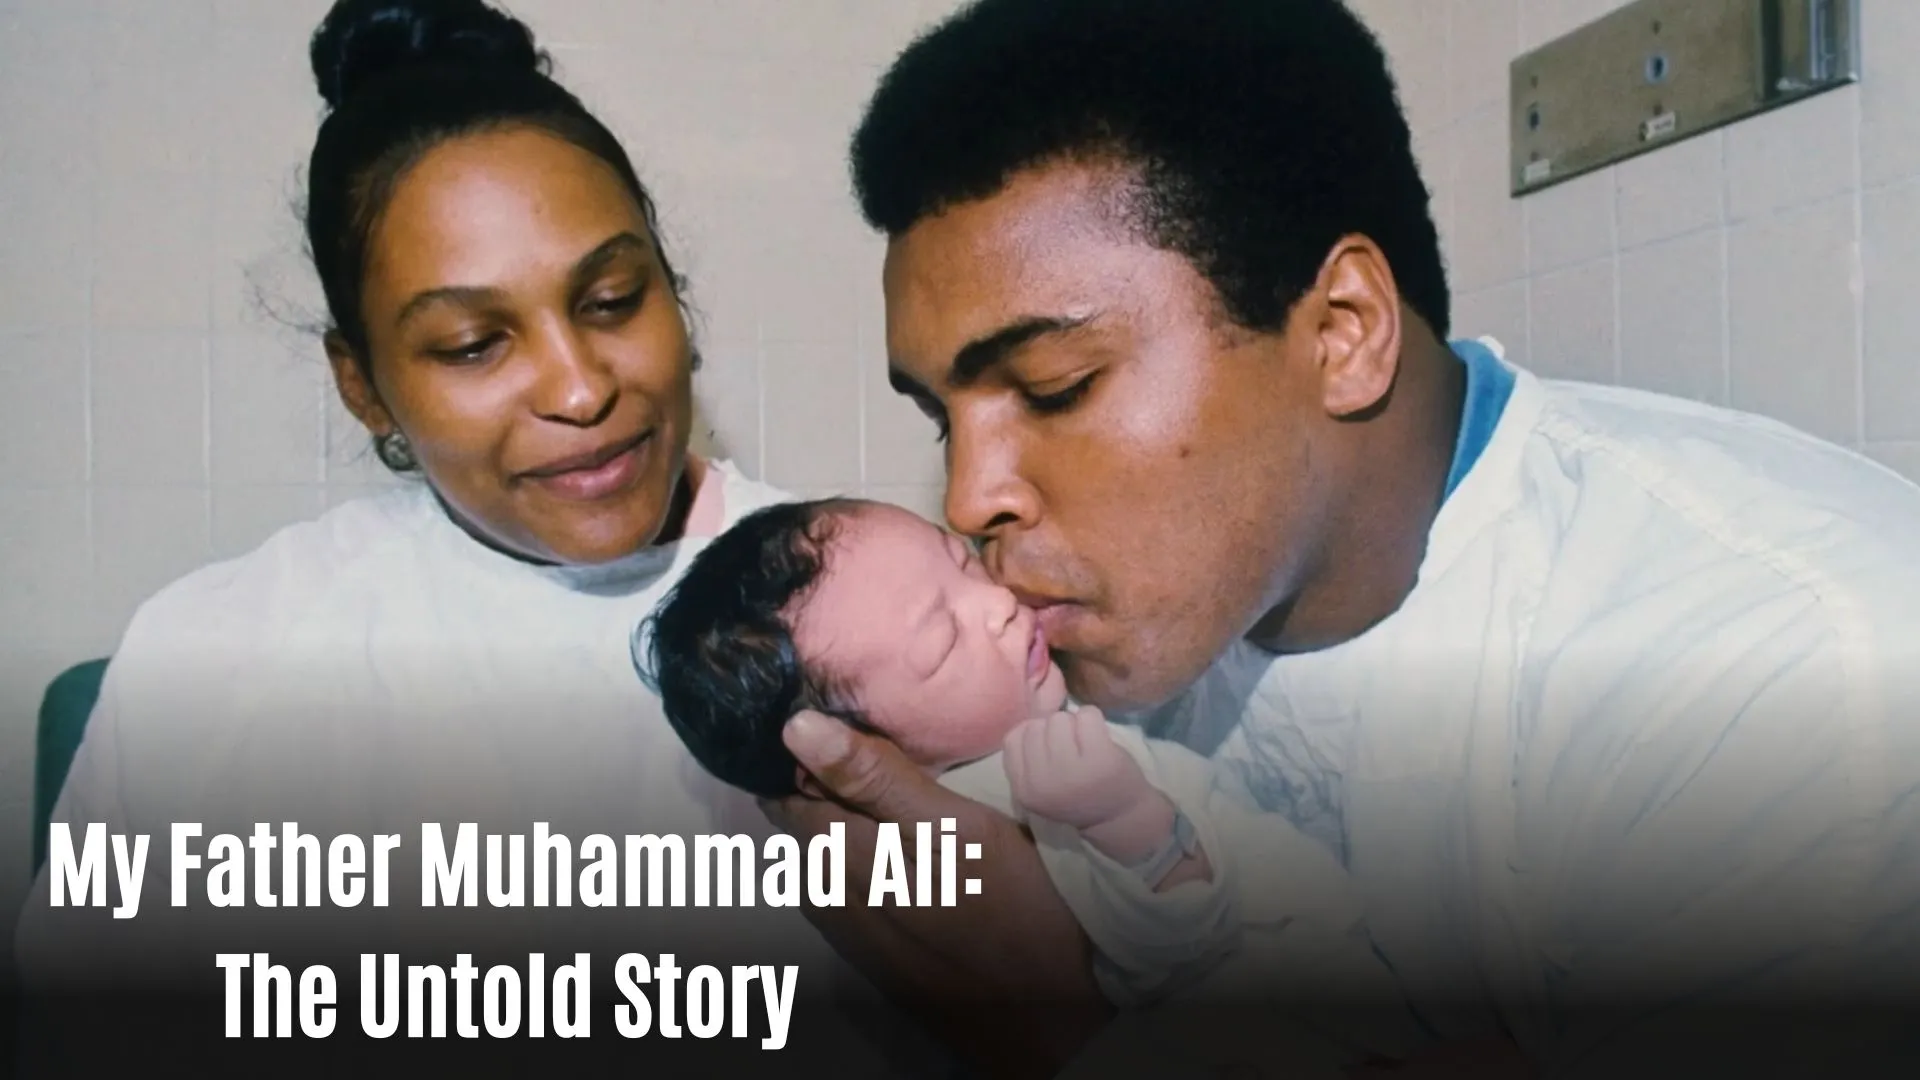 My Father Muhammad Ali: The Untold Story Parents Guide